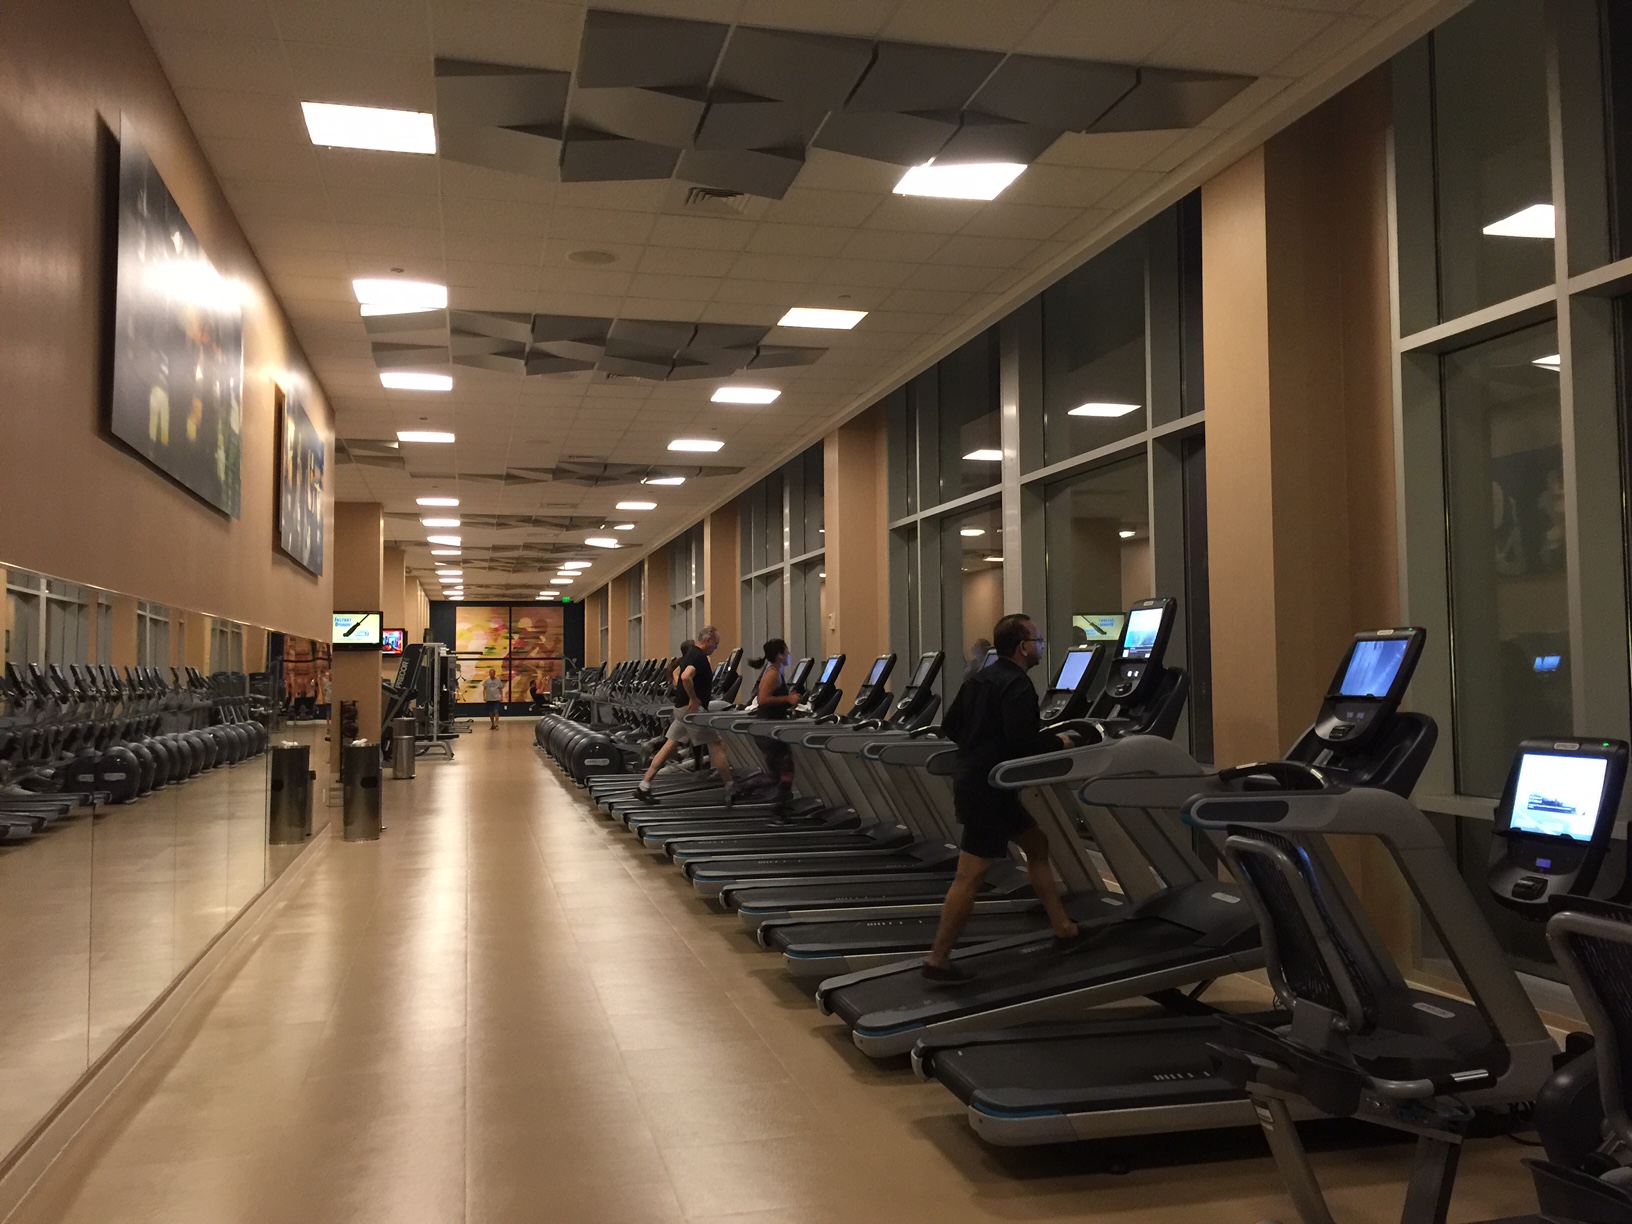 Hilton Orlando fitness center | hotel gyms Orlando | best hotels in Orlando florida | international drive hotels | staying fit while traveling | acupful of carters